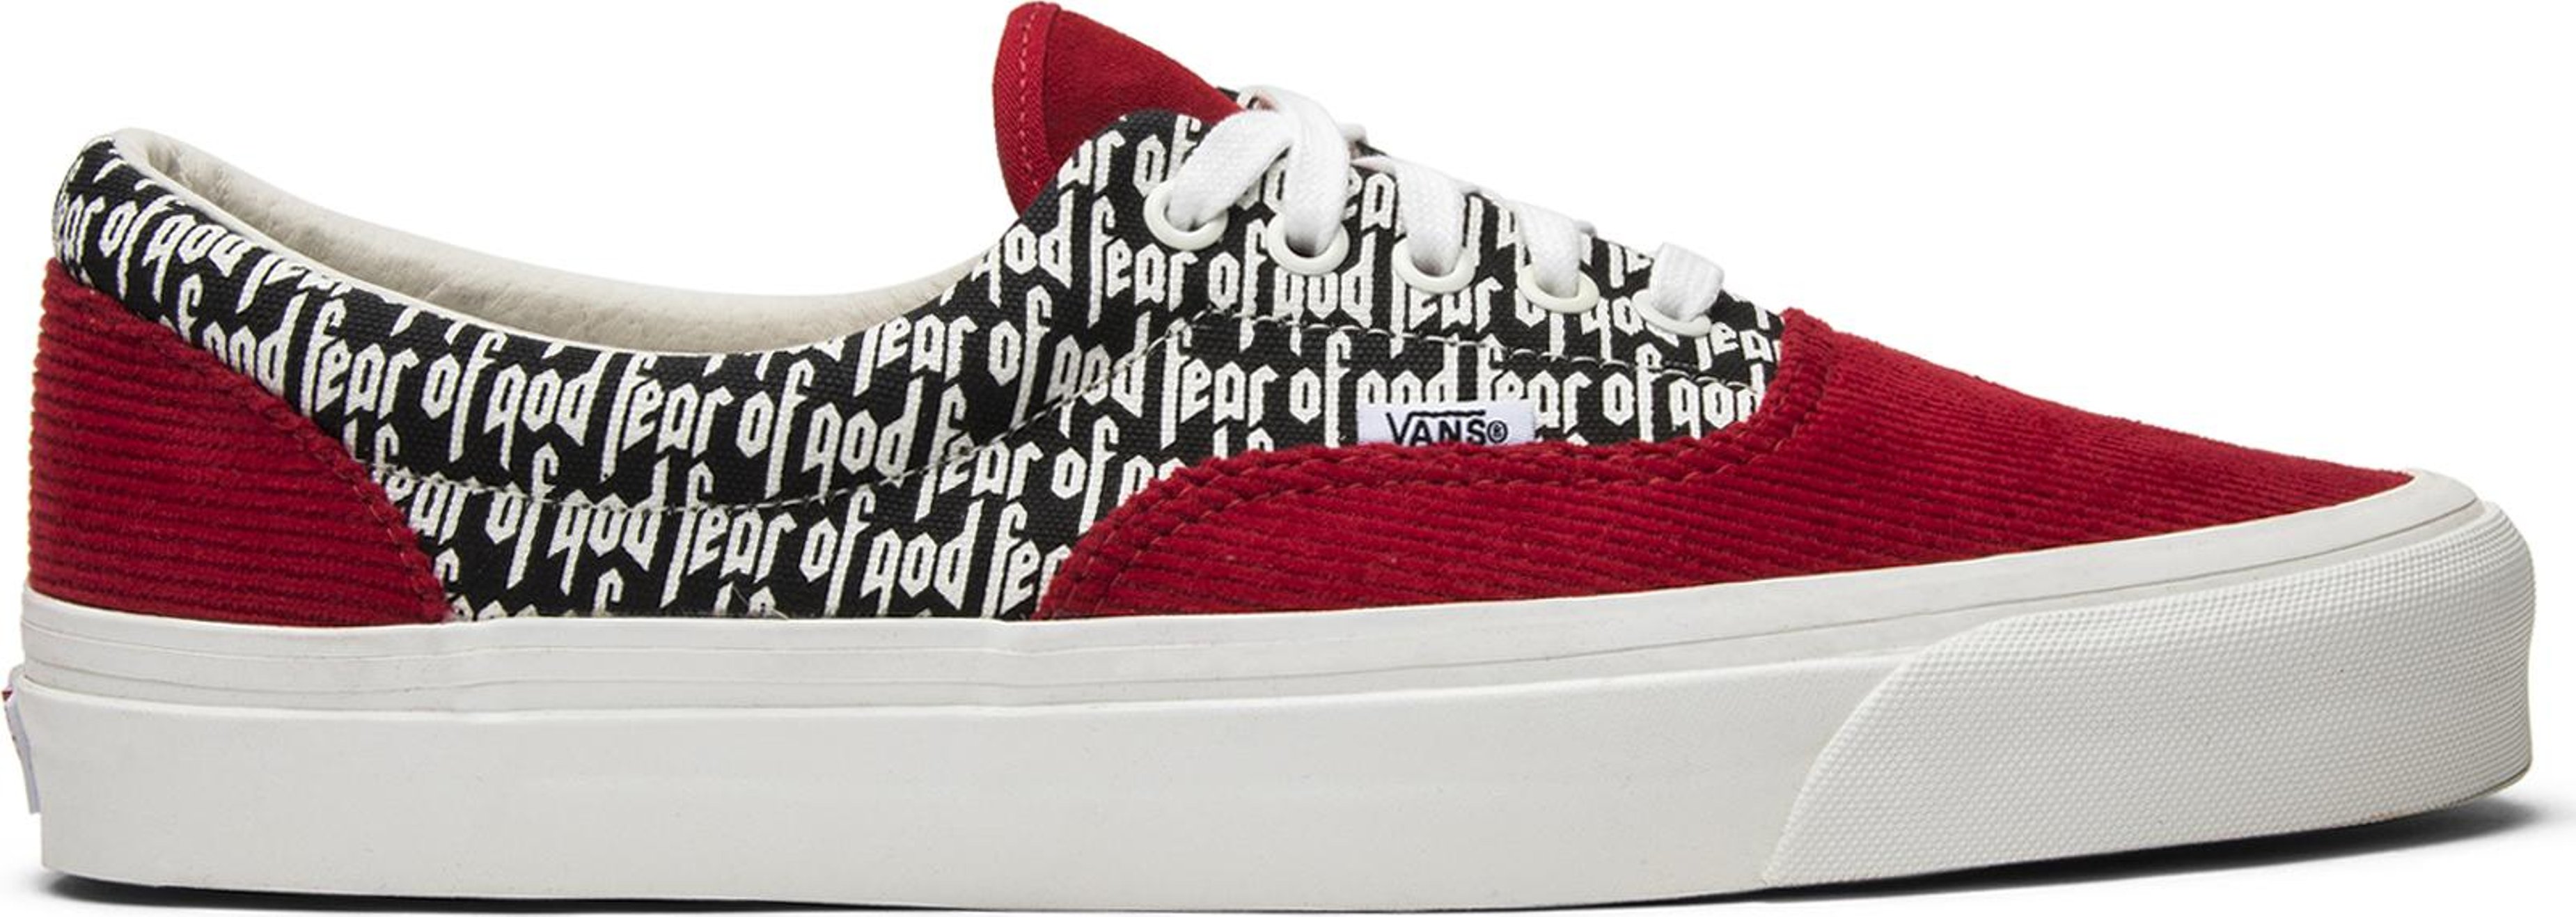 Buy Fear of God x Era 95 DX 'Collection 2 Red' - VN0A3MQ5PZQ | GOAT